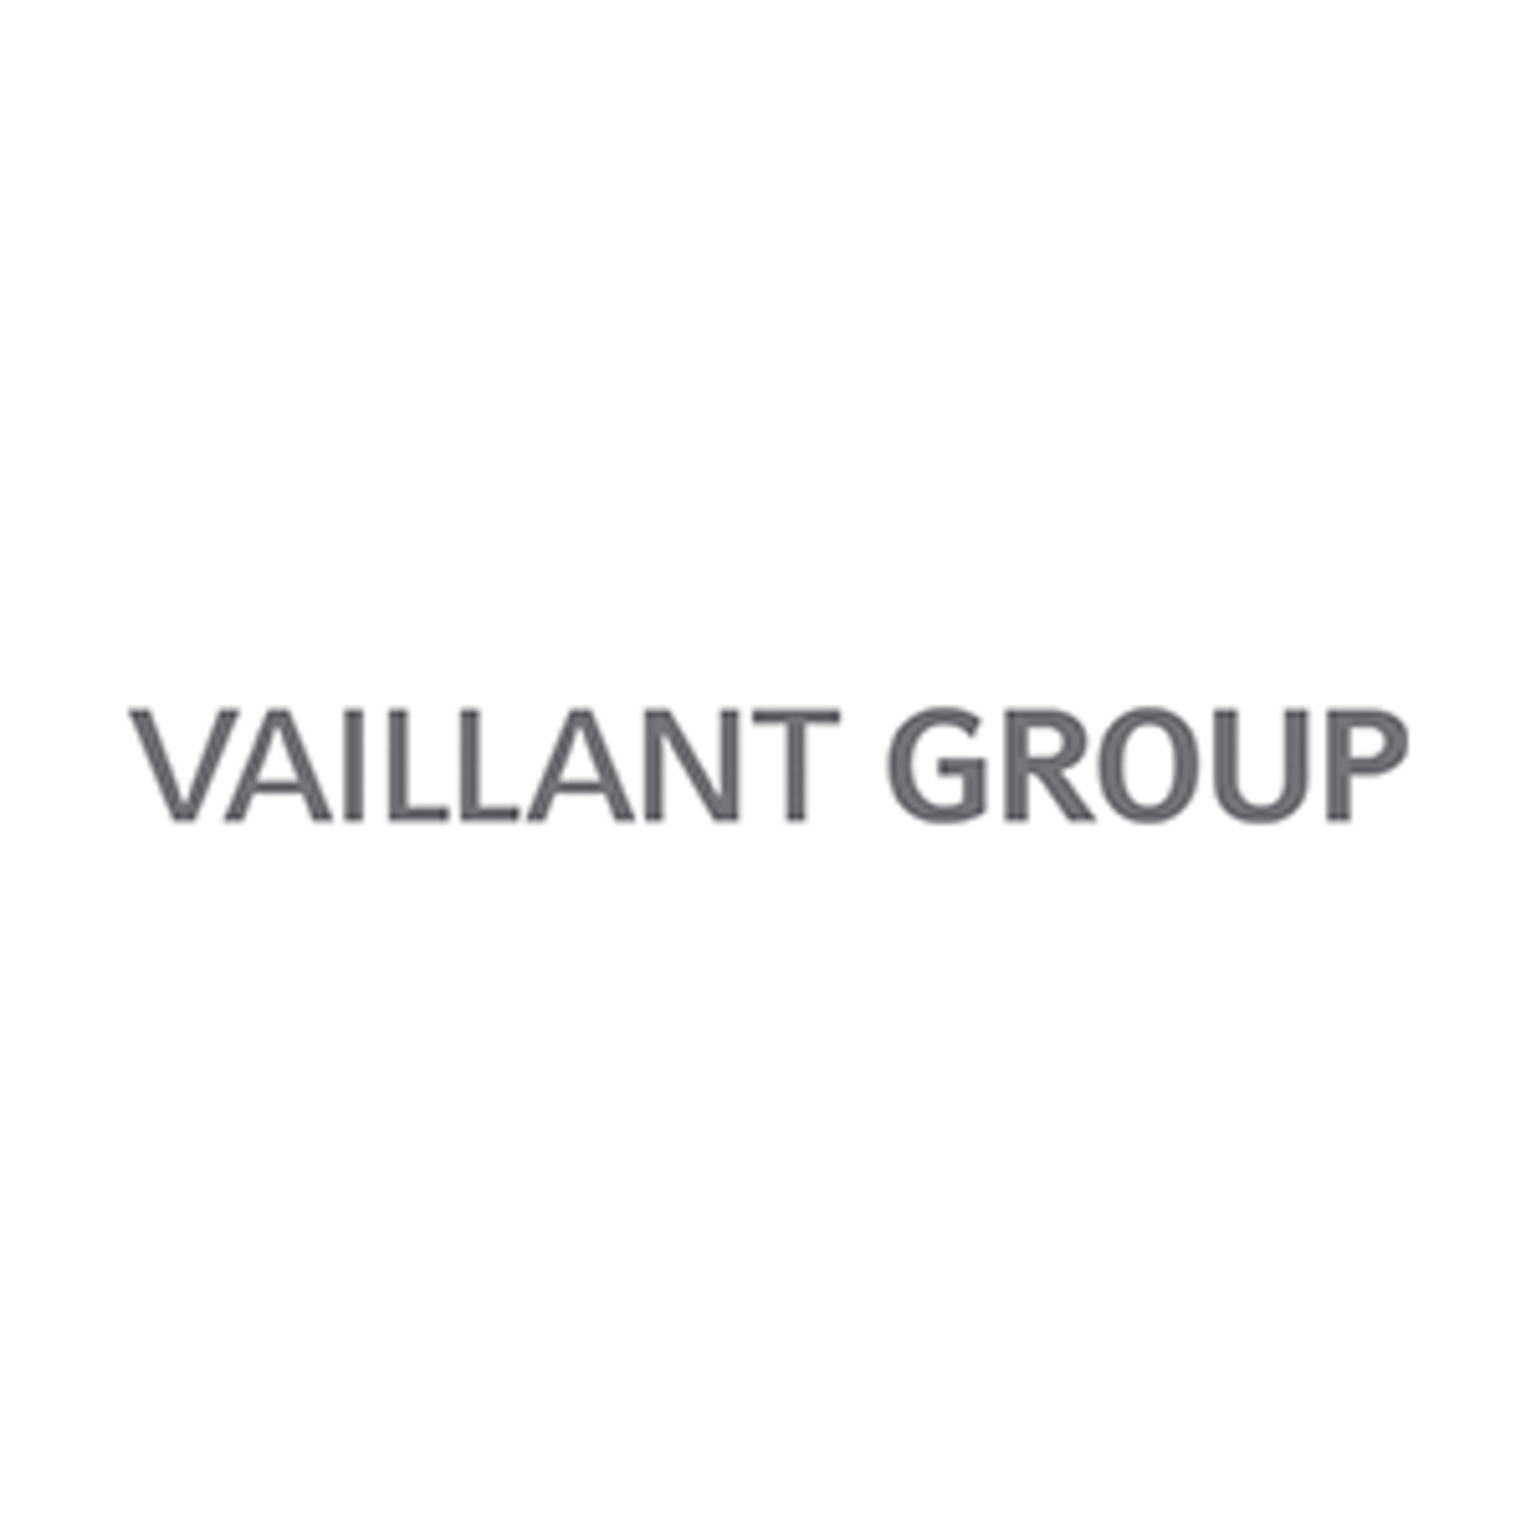 Vaillant-group